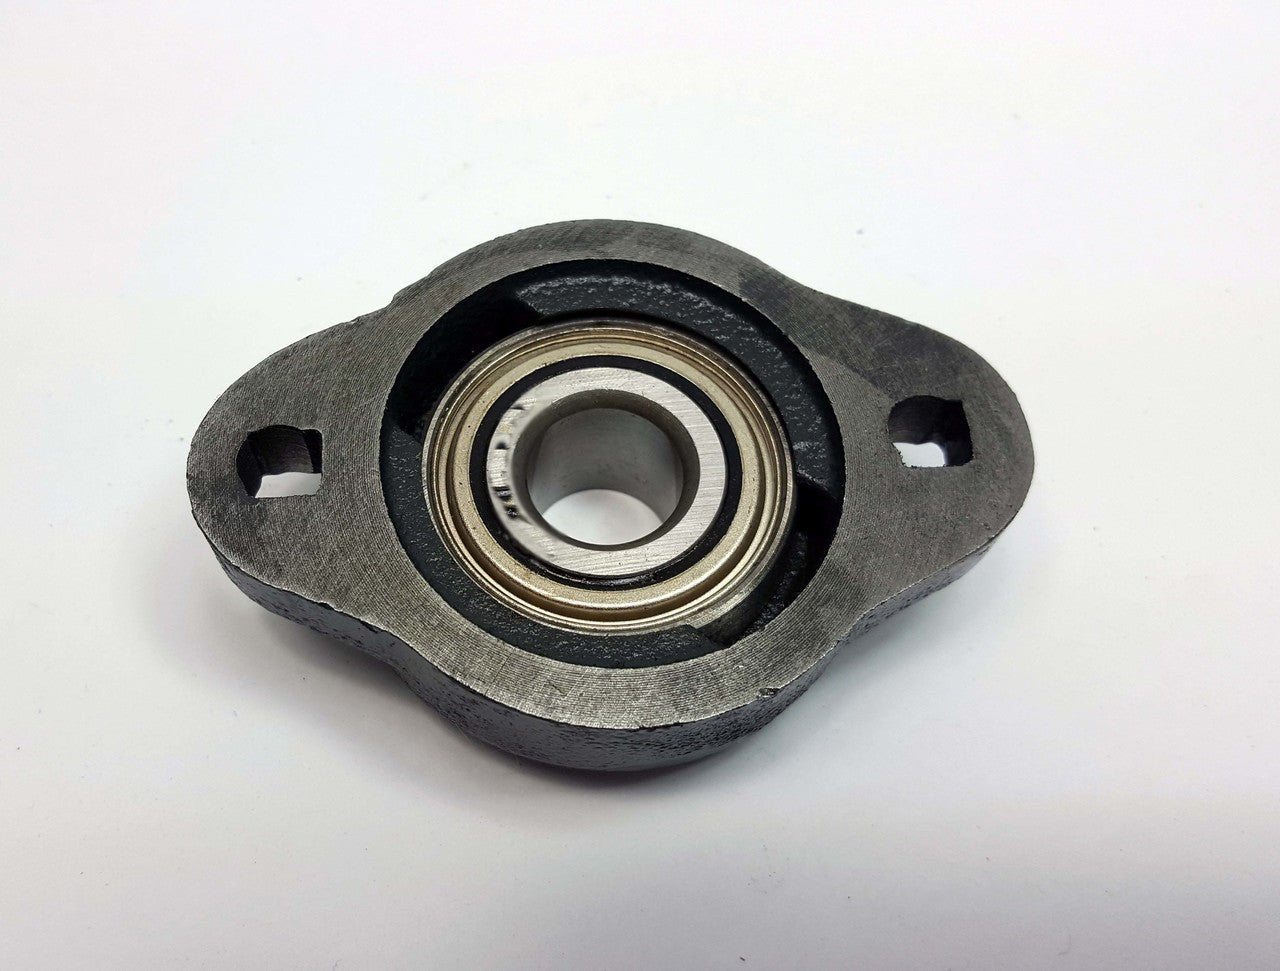 Lawn Striper 5/8" Bearing and Flange - Used in all Harrison Specialties Lawn Striping Kits